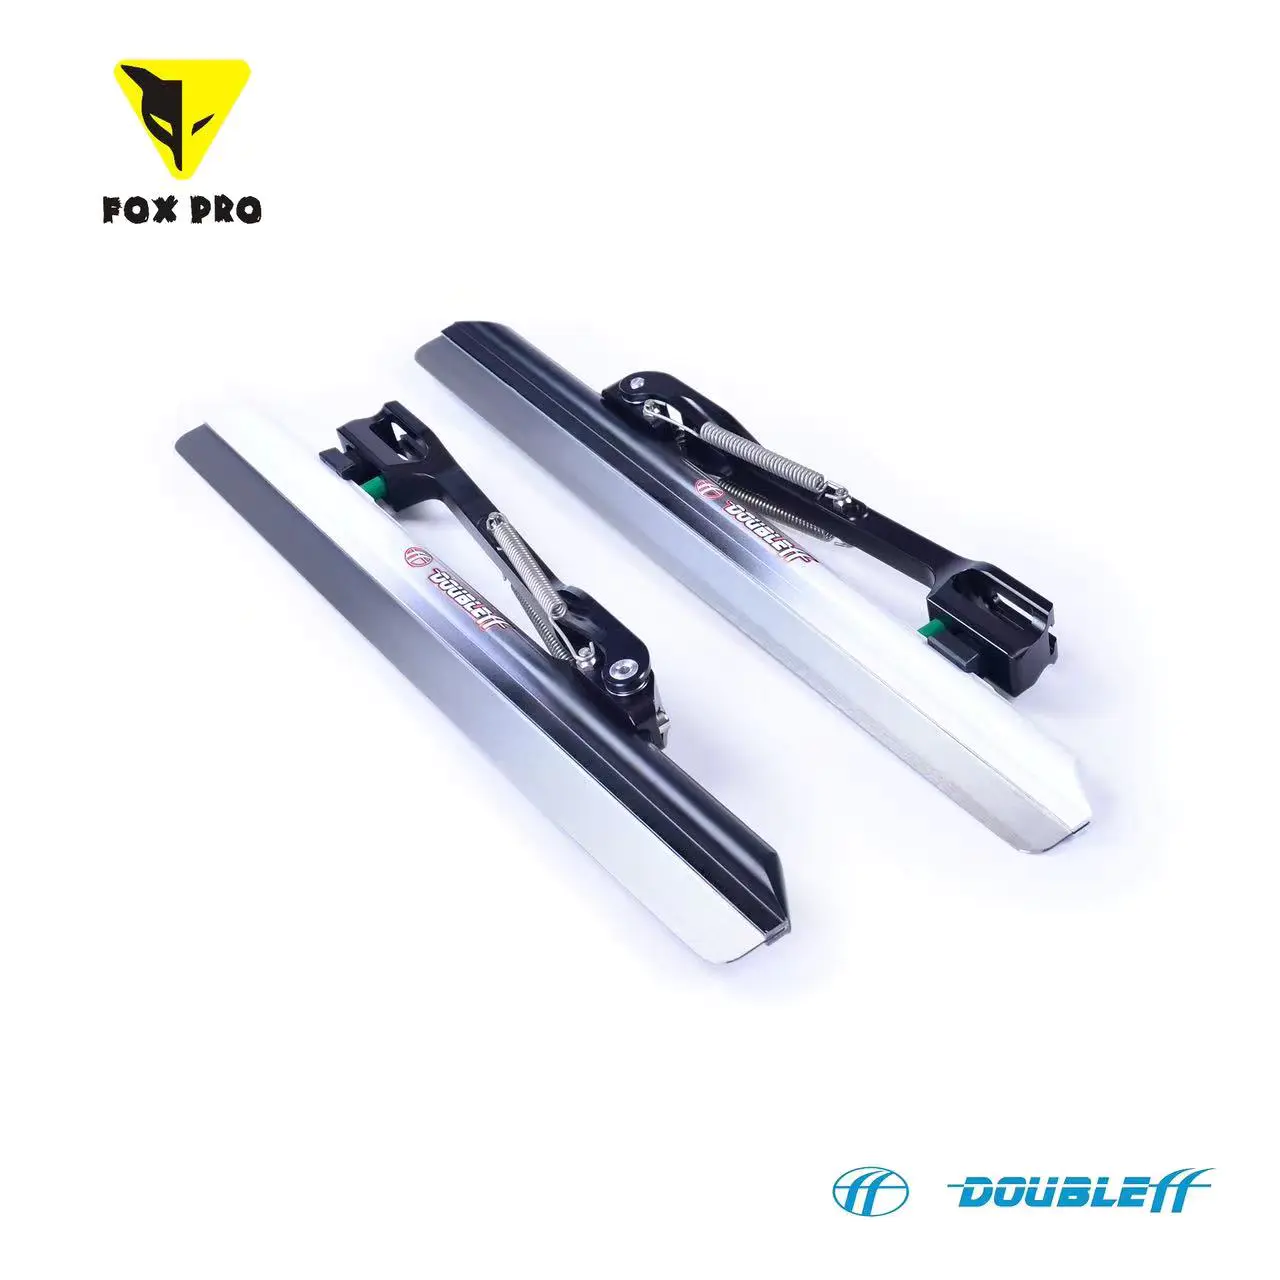 FOX PRO x Double FF 64 HRC Long Track Ice Skate Blades CNC Aluminum 7005 Ice Skate Blades For MEN&Women Indoor/Outdoor Sports